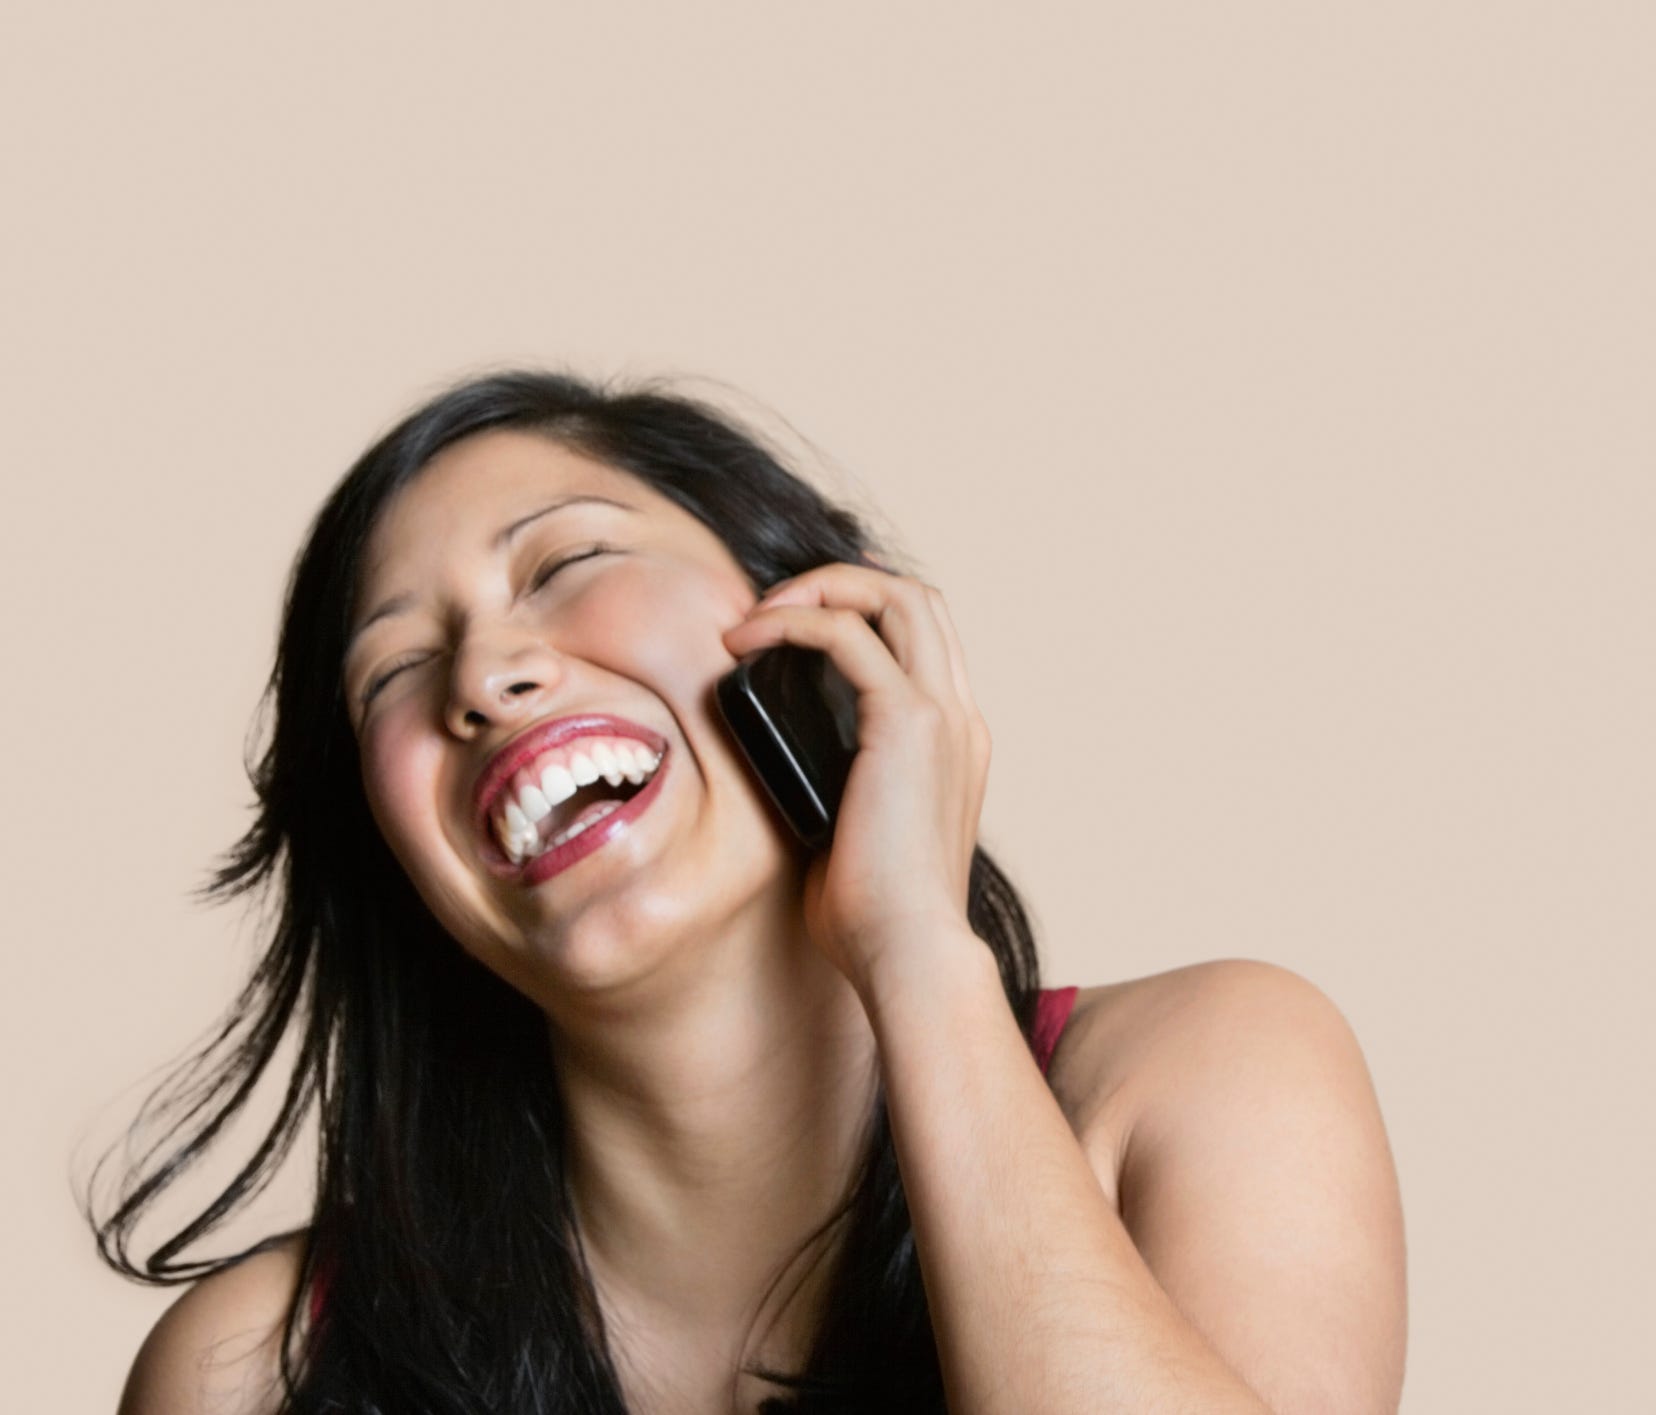 Cheerful young woman talking on mobile phone over colored background.